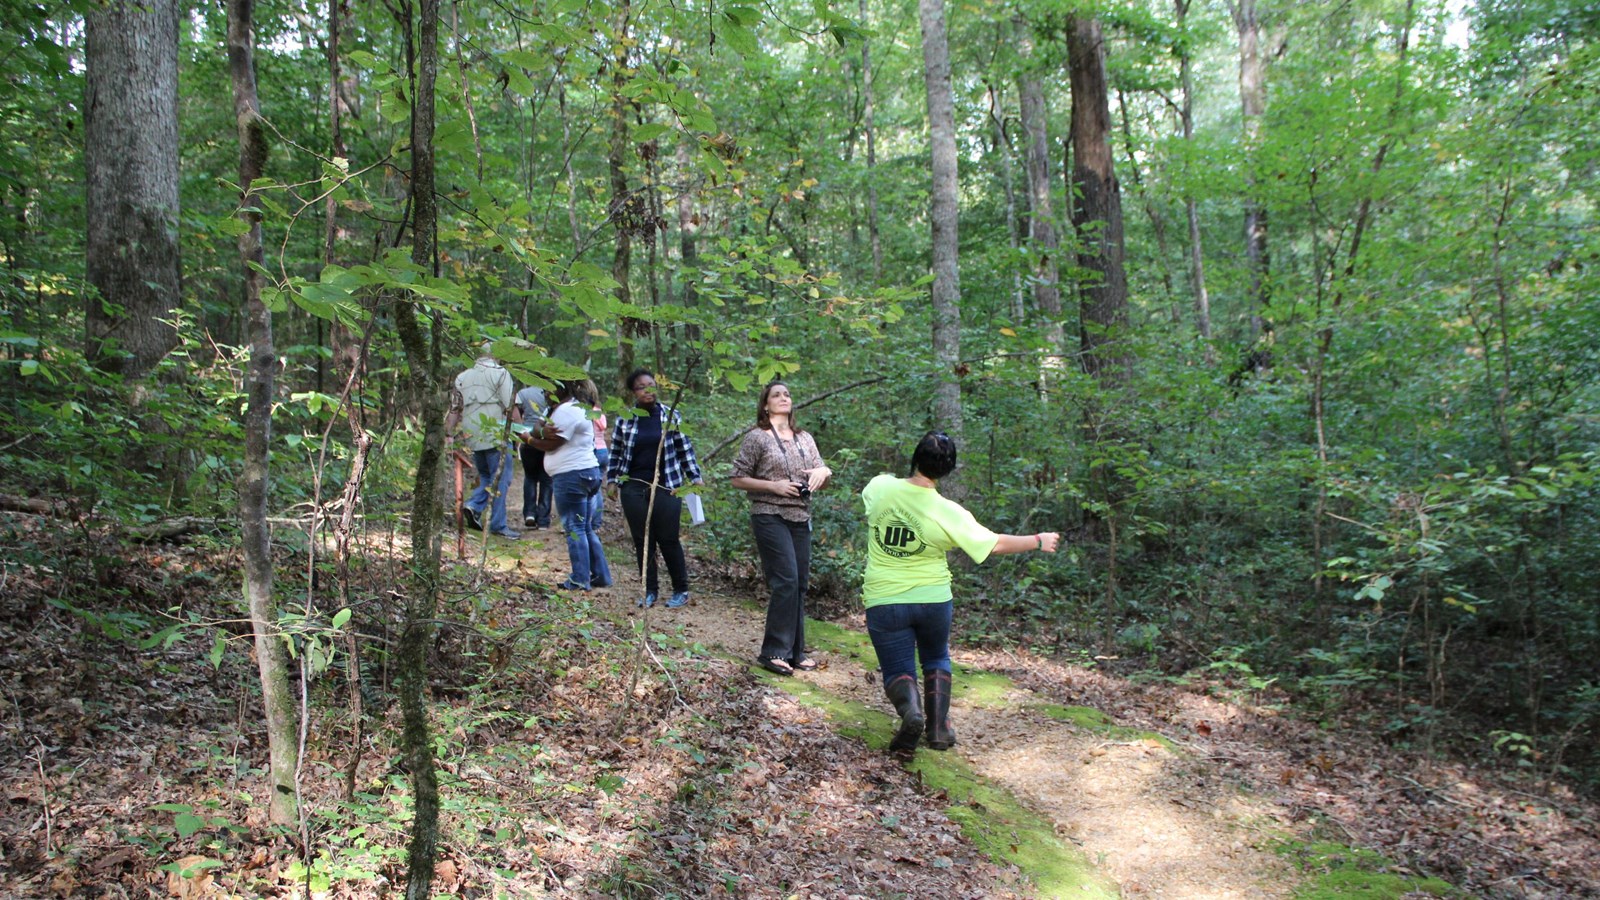 A dirt path in a forest with several teenage students walking and swinging their arms.